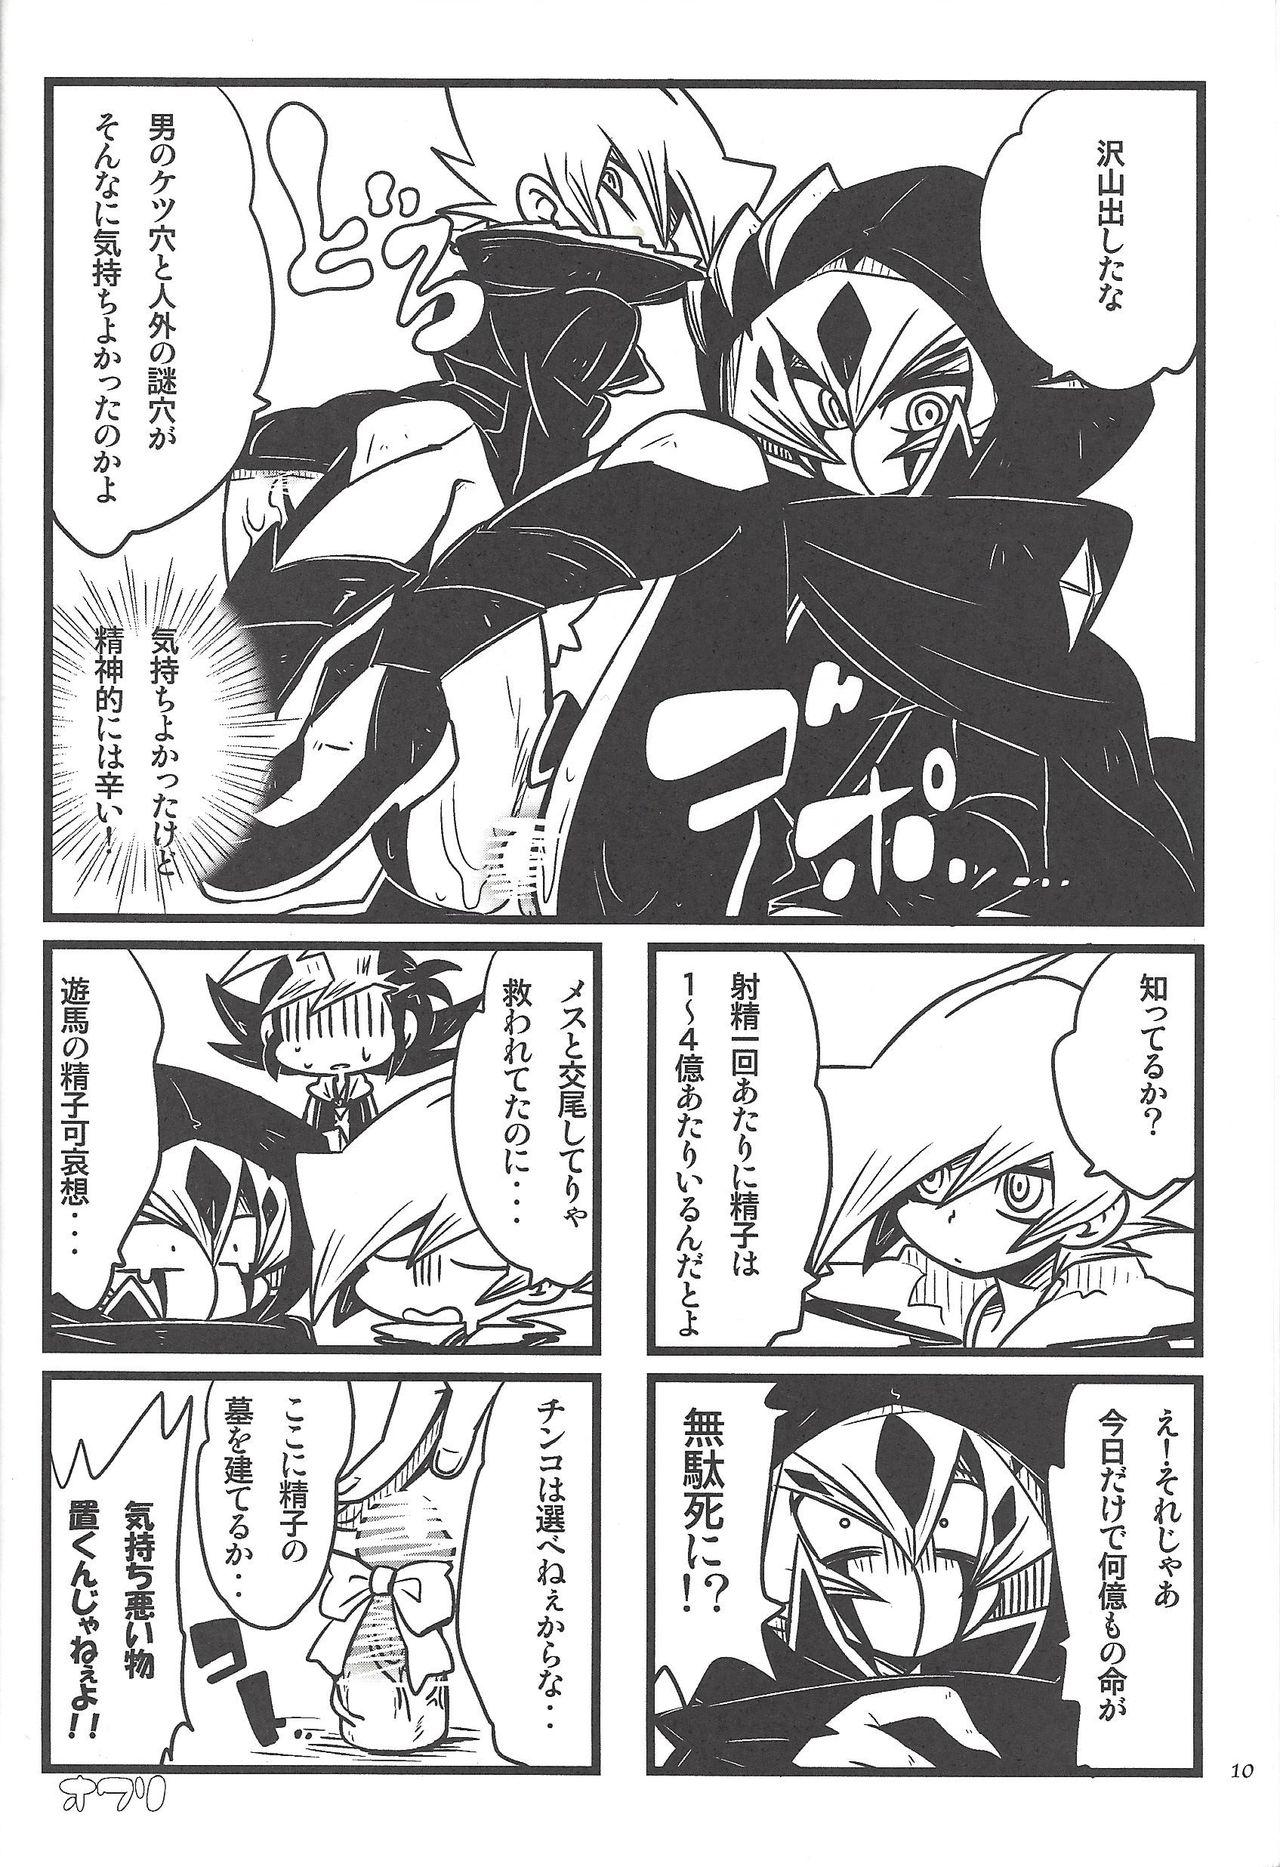 Tit 990 Vector II - Yu gi oh zexal Time - Page 9